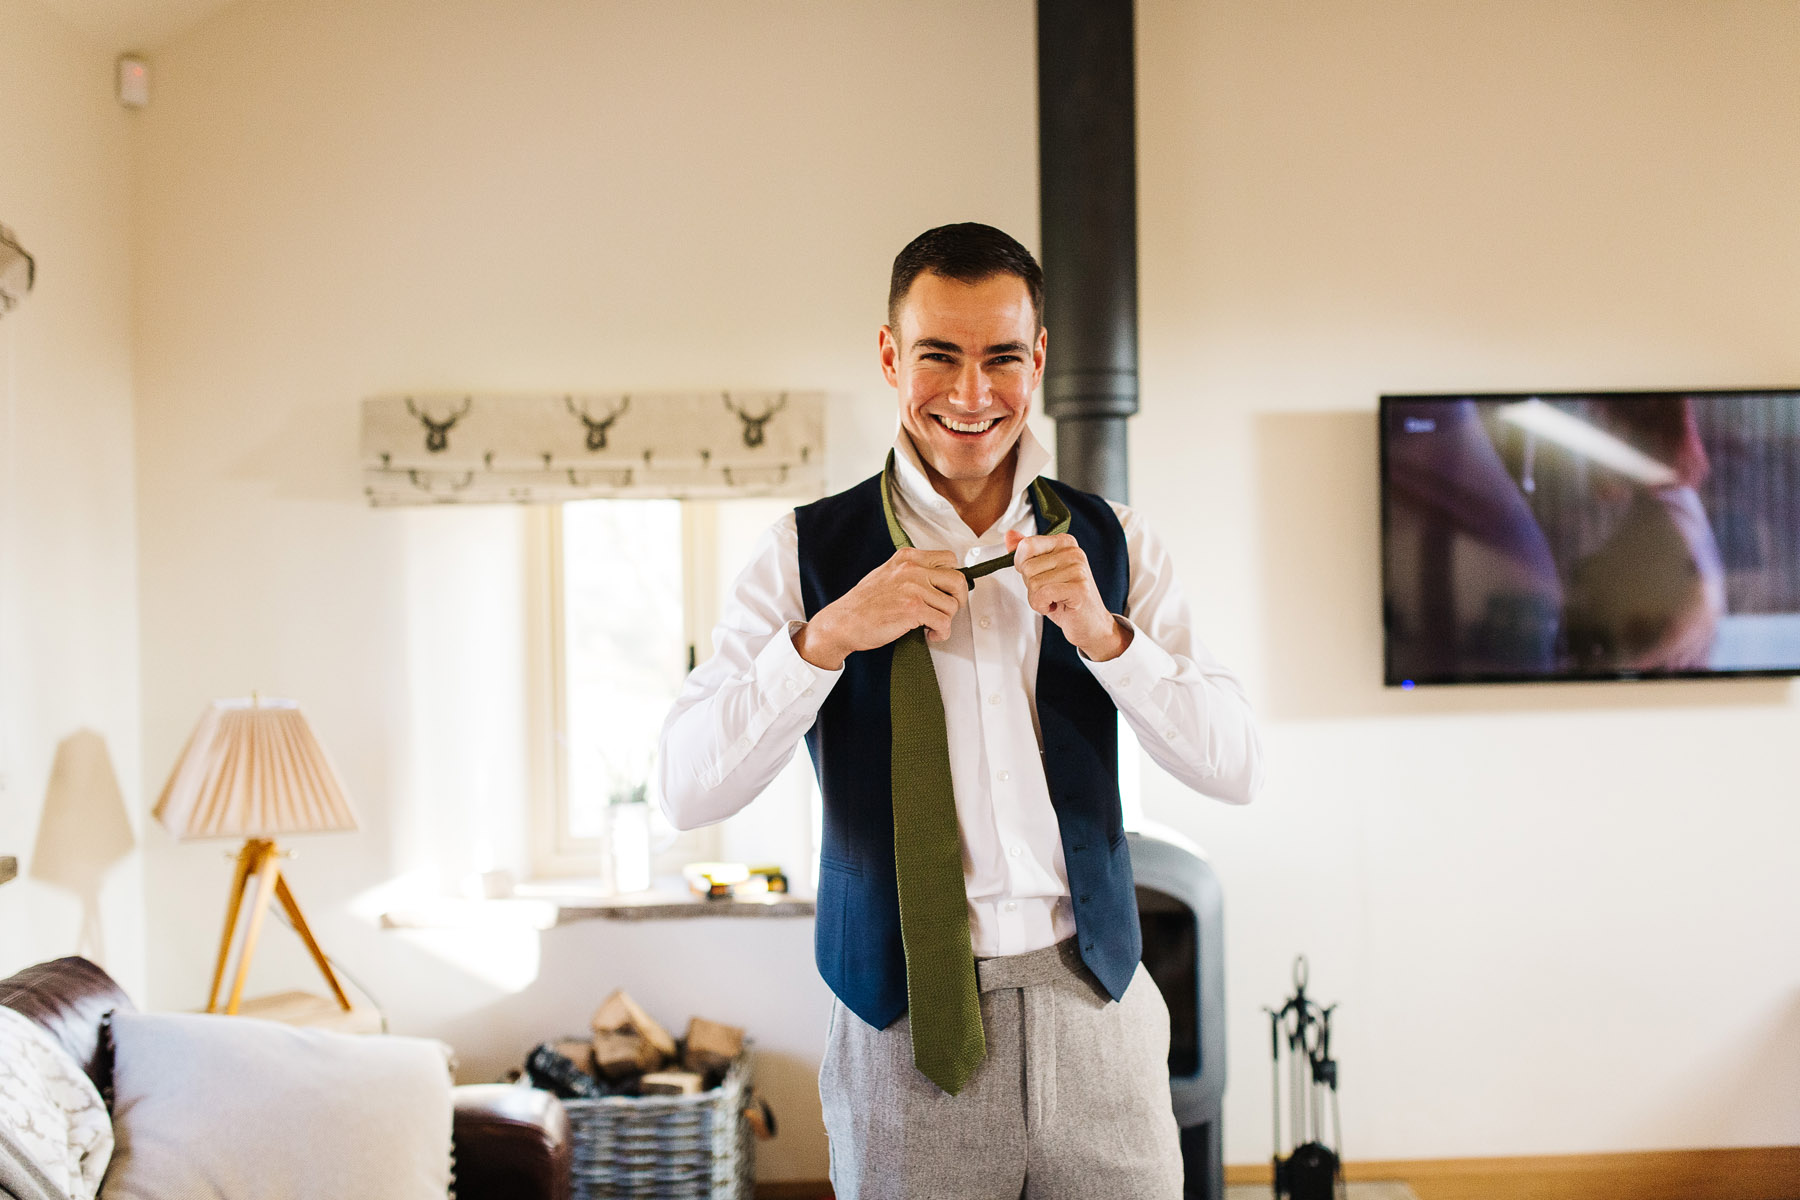 Autumn Wedding at Browsholme Hall Groom getting ready